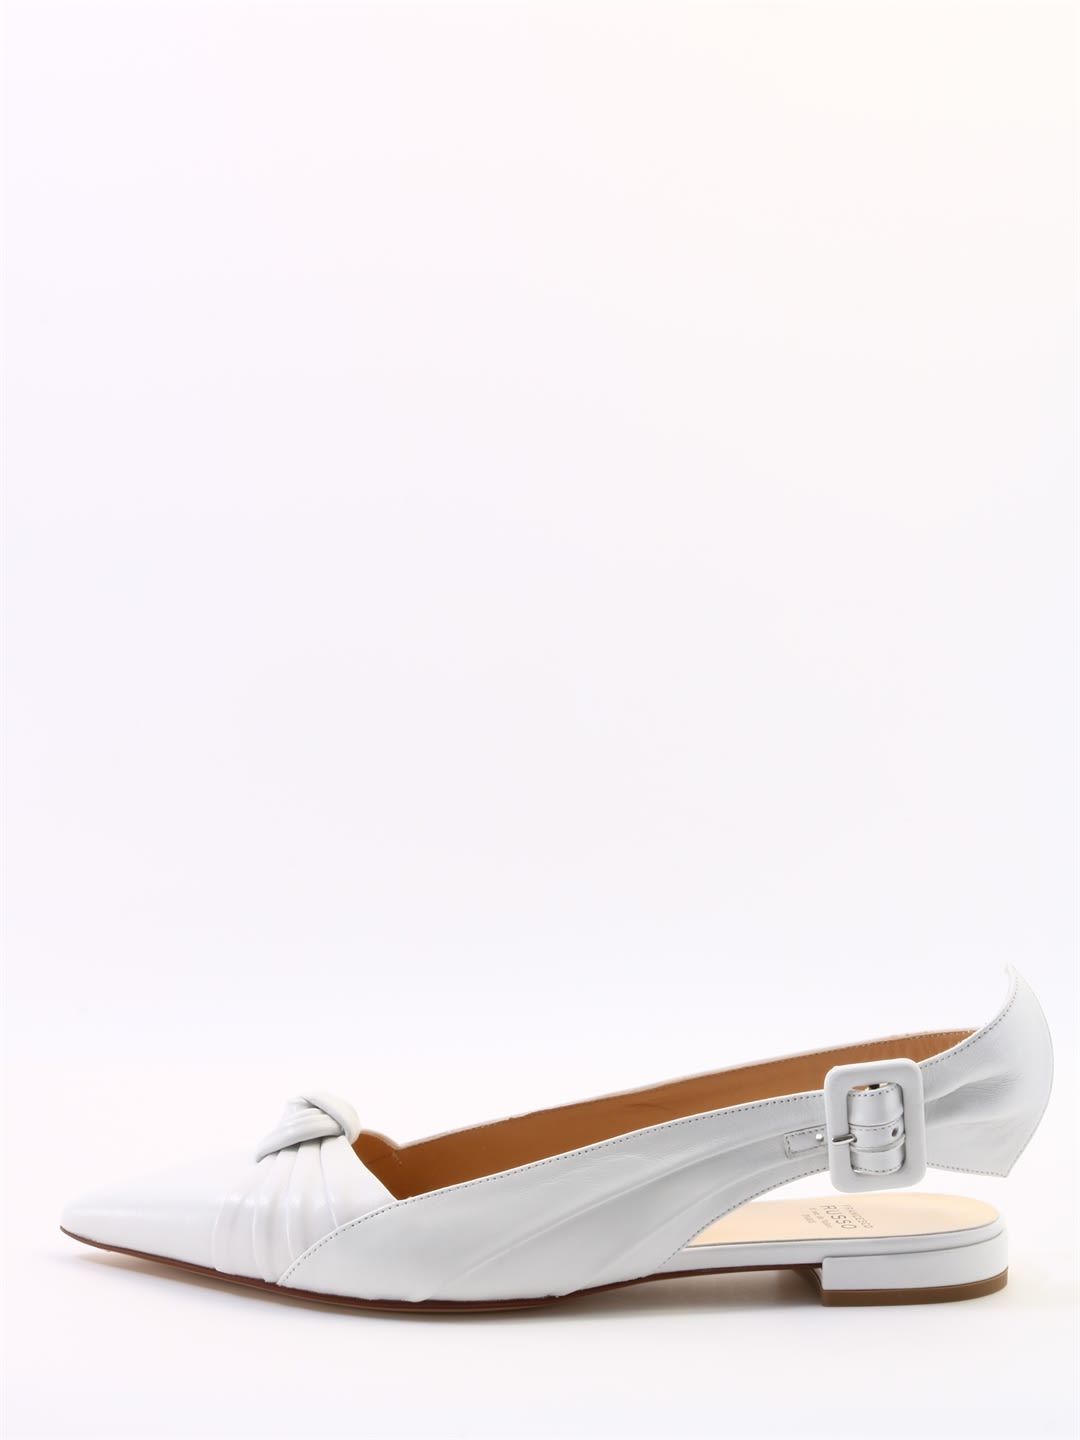 Buy Francesco Russo Slingbask Knot White online, shop Francesco Russo shoes with free shipping